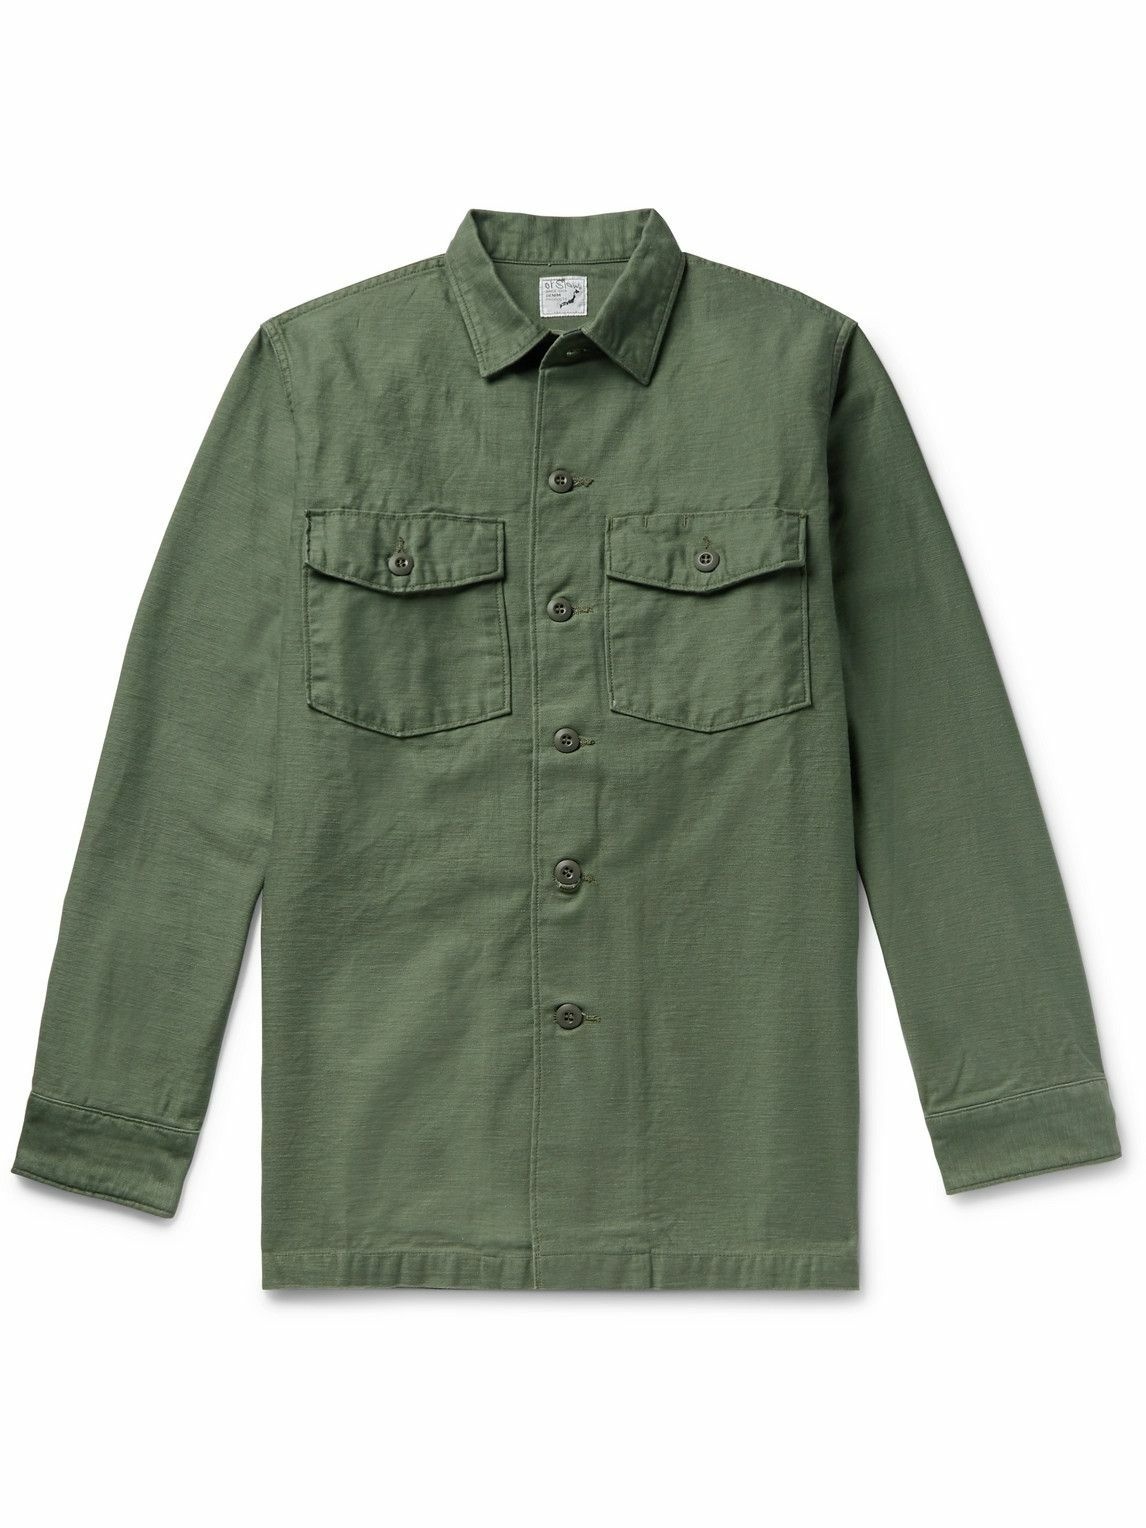 OrSlow - Cotton Overshirt - Green orSlow